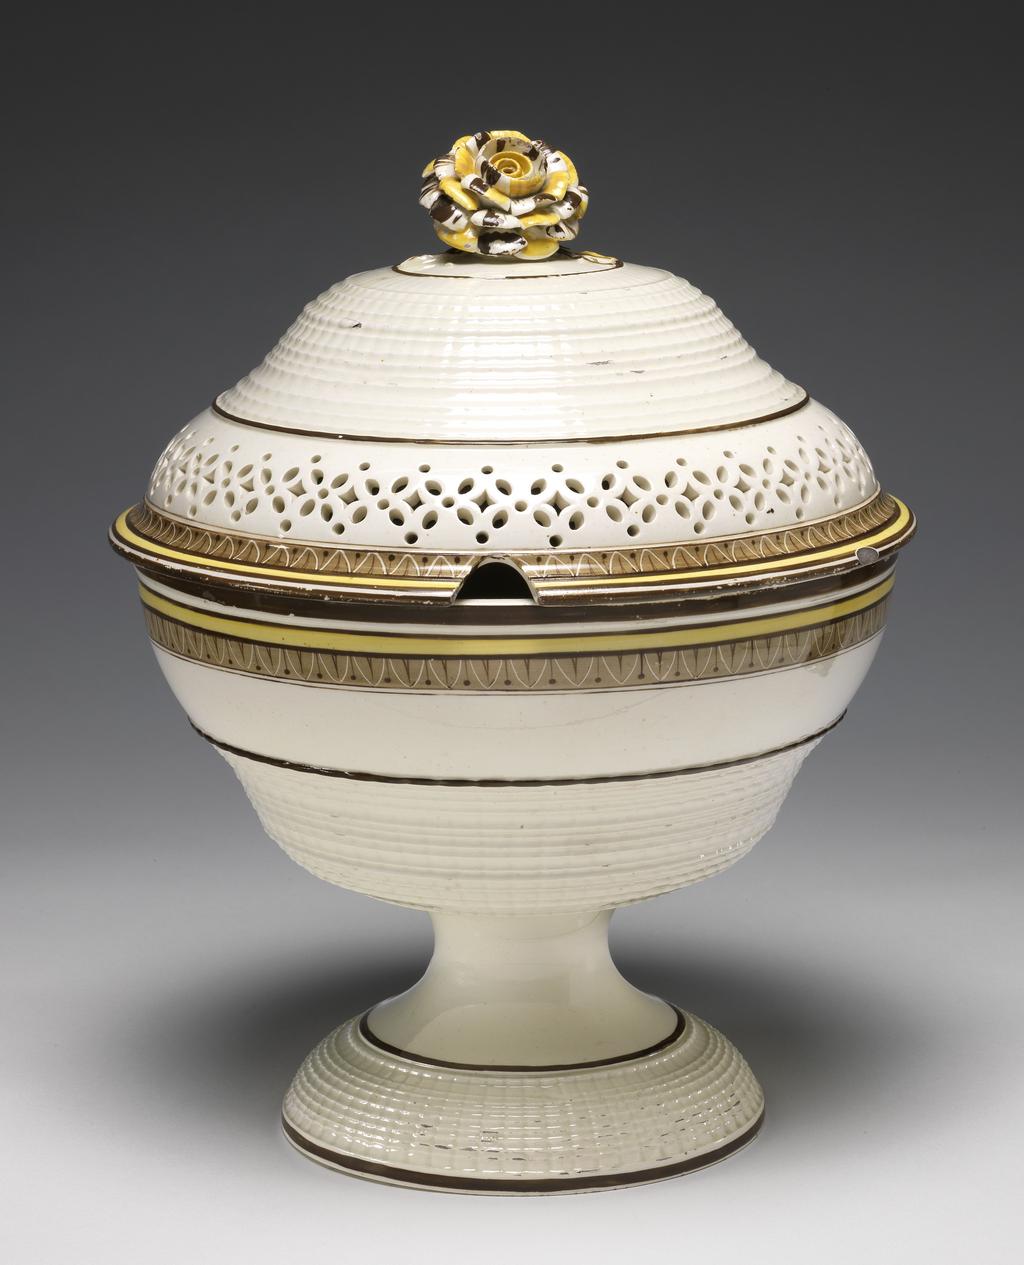 An image of Cream Bowl. James and Charles Whitehead (manufacturer, probably); Daniel & Brown (decorator, probably). The circular bowl has an ogee profile and stands on a domed spreading foot. The domed cover is also of ogee outline and has an aperture in the rim for a spoon, and a large rose-shaped knob on a stalk with three leaves and two buds. The outer edge of the foot, the lower part of the bowl and the upper part of the cover are decorated with zones of turned bands resembling basket-work, and the cover has a pierced repeating border of four-petal flowers separated by a lozenge with a circle above and below. The cover and bowl have a brown edge, borders of a yellow band between two brown, and an inner border of brown formal leaves alternating with a berry on stalk. There are horizontal brown bands on either side of the turning on the foot and cover, and above the turning on the bowl. The knob is dabbed with yellow and brown. Cream-coloured earthenware, thrown, turned, pierced, and painted in yellow and brown enamels, height, whole, 28 cm, diameter, cover, 22.3 cm, diameter, bowl, 21.2 cm, circa 1795-1810. Staffordshire, England. Neoclassical.